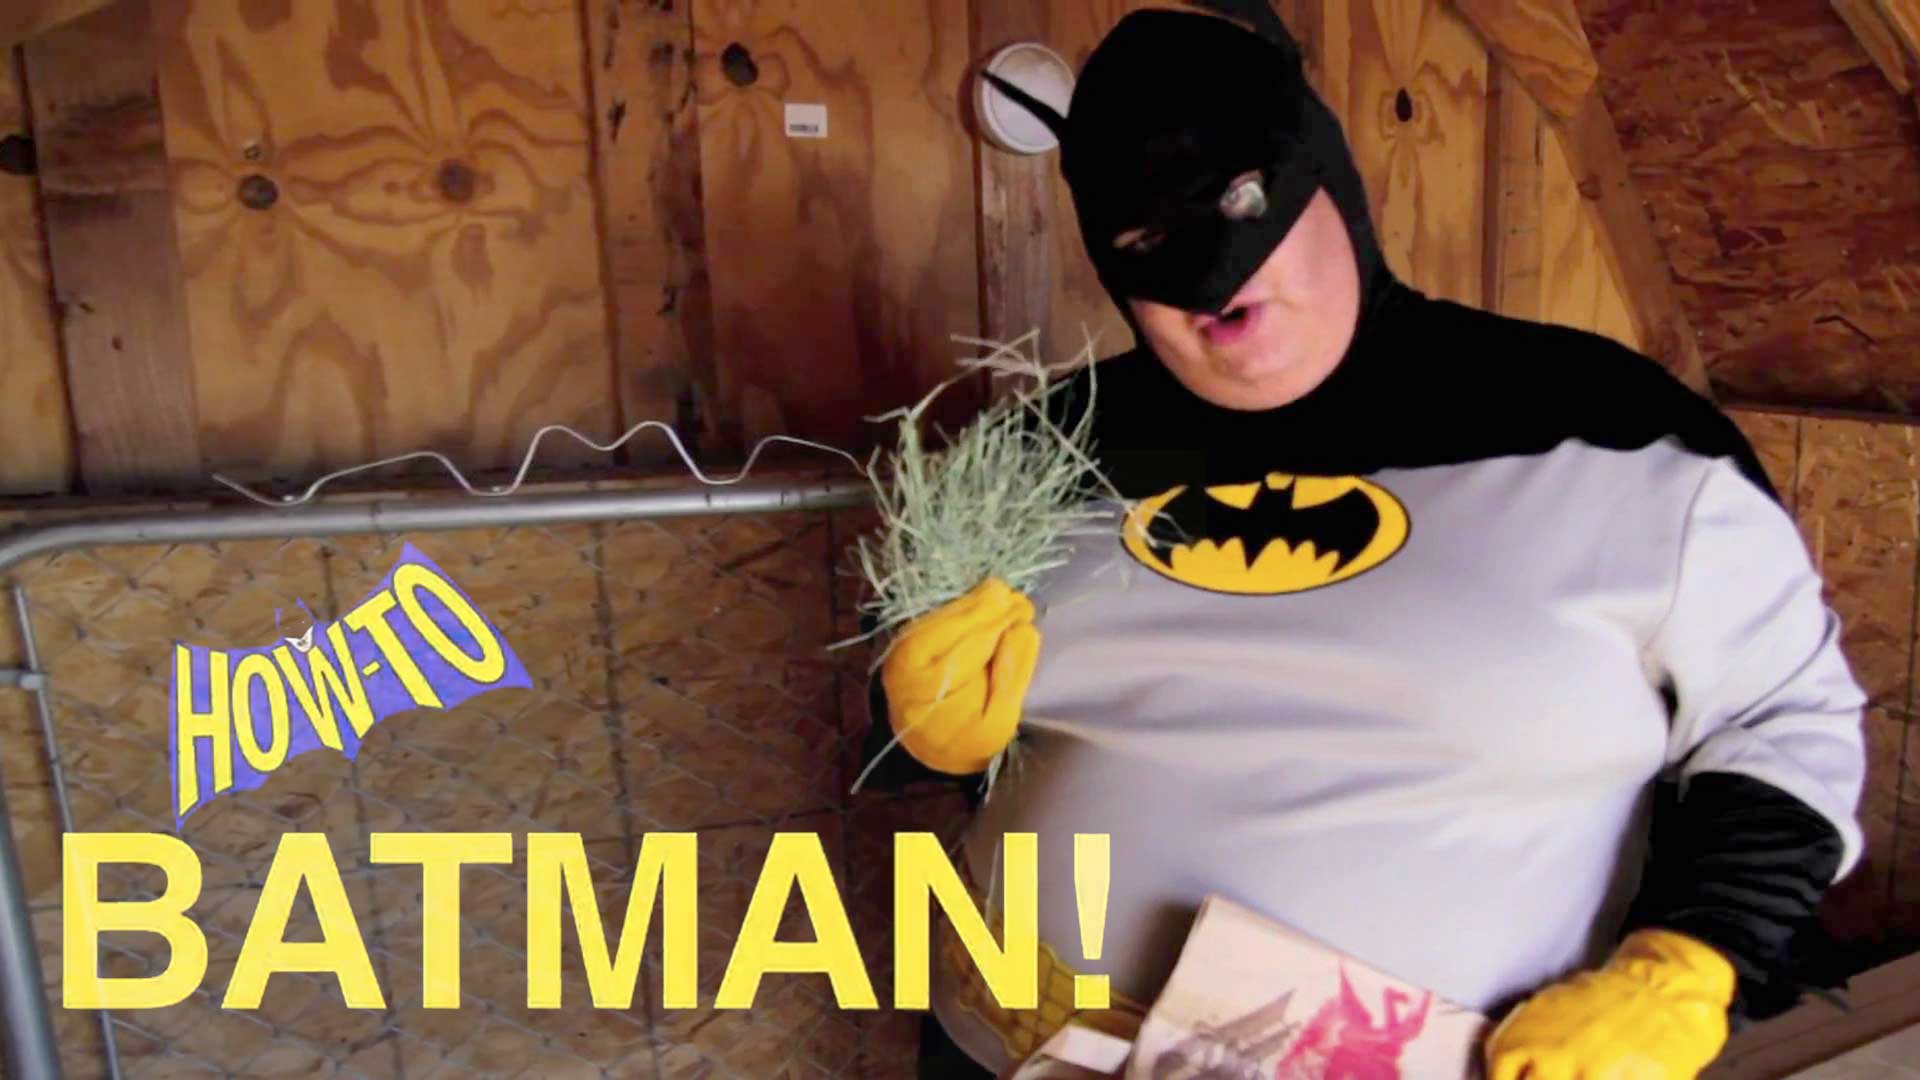 How To Batman Teaches You How To Properly Order From Subway Restaurant